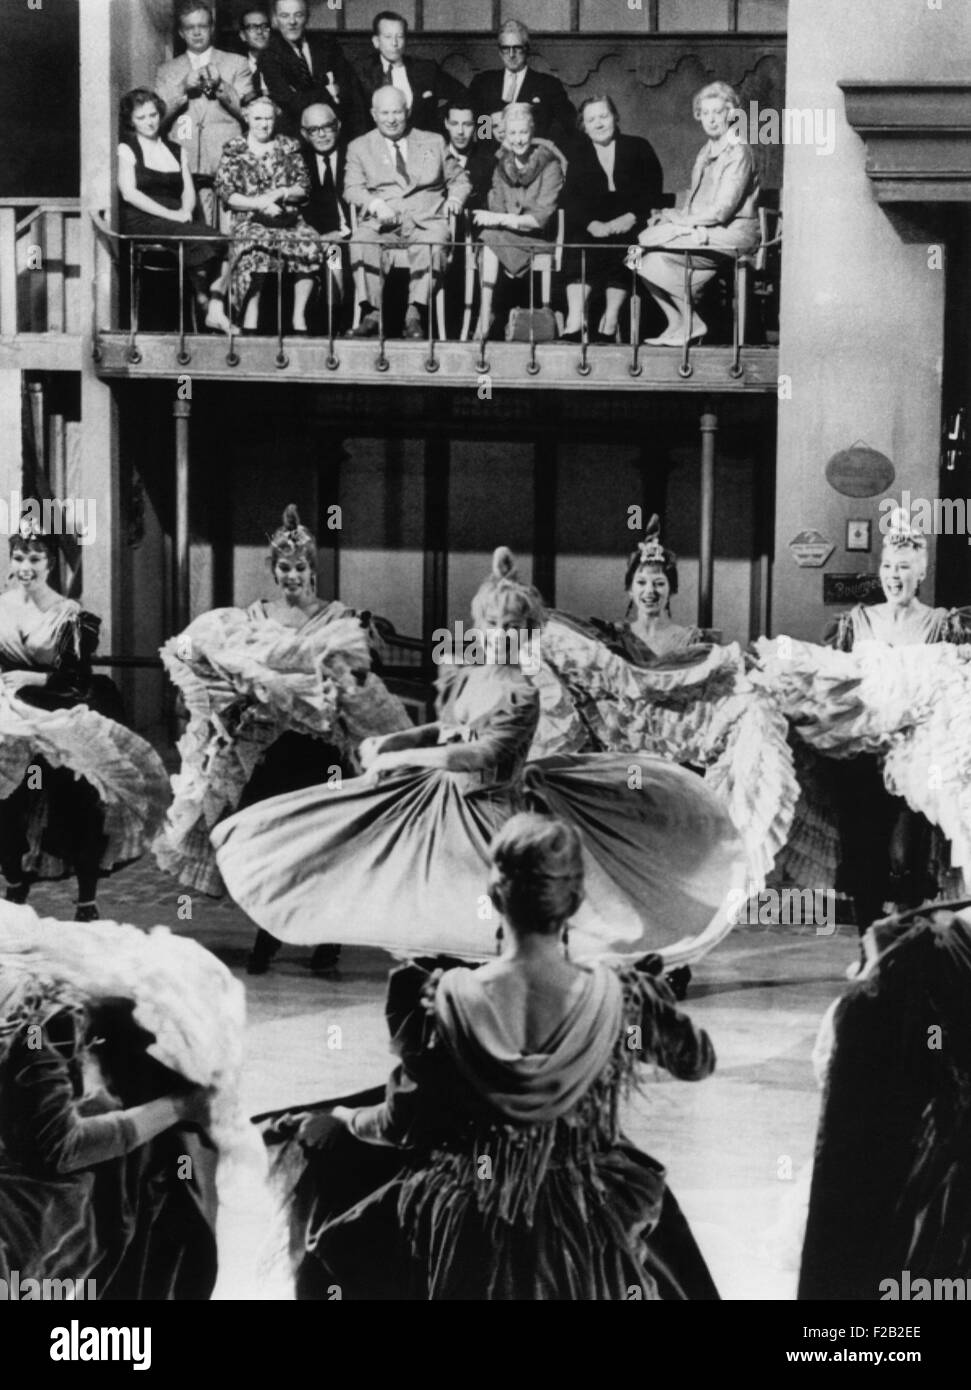 Premier Nikita Khrushchev's party watches a rehearsal for the film CANCAN. Actress Shirley MacLaine swirls surrounded by 'Cancan' dancing girls at 20th Century Fox Studios. Sept. 19, 1959. (CSU 2015 8 547) Stock Photo